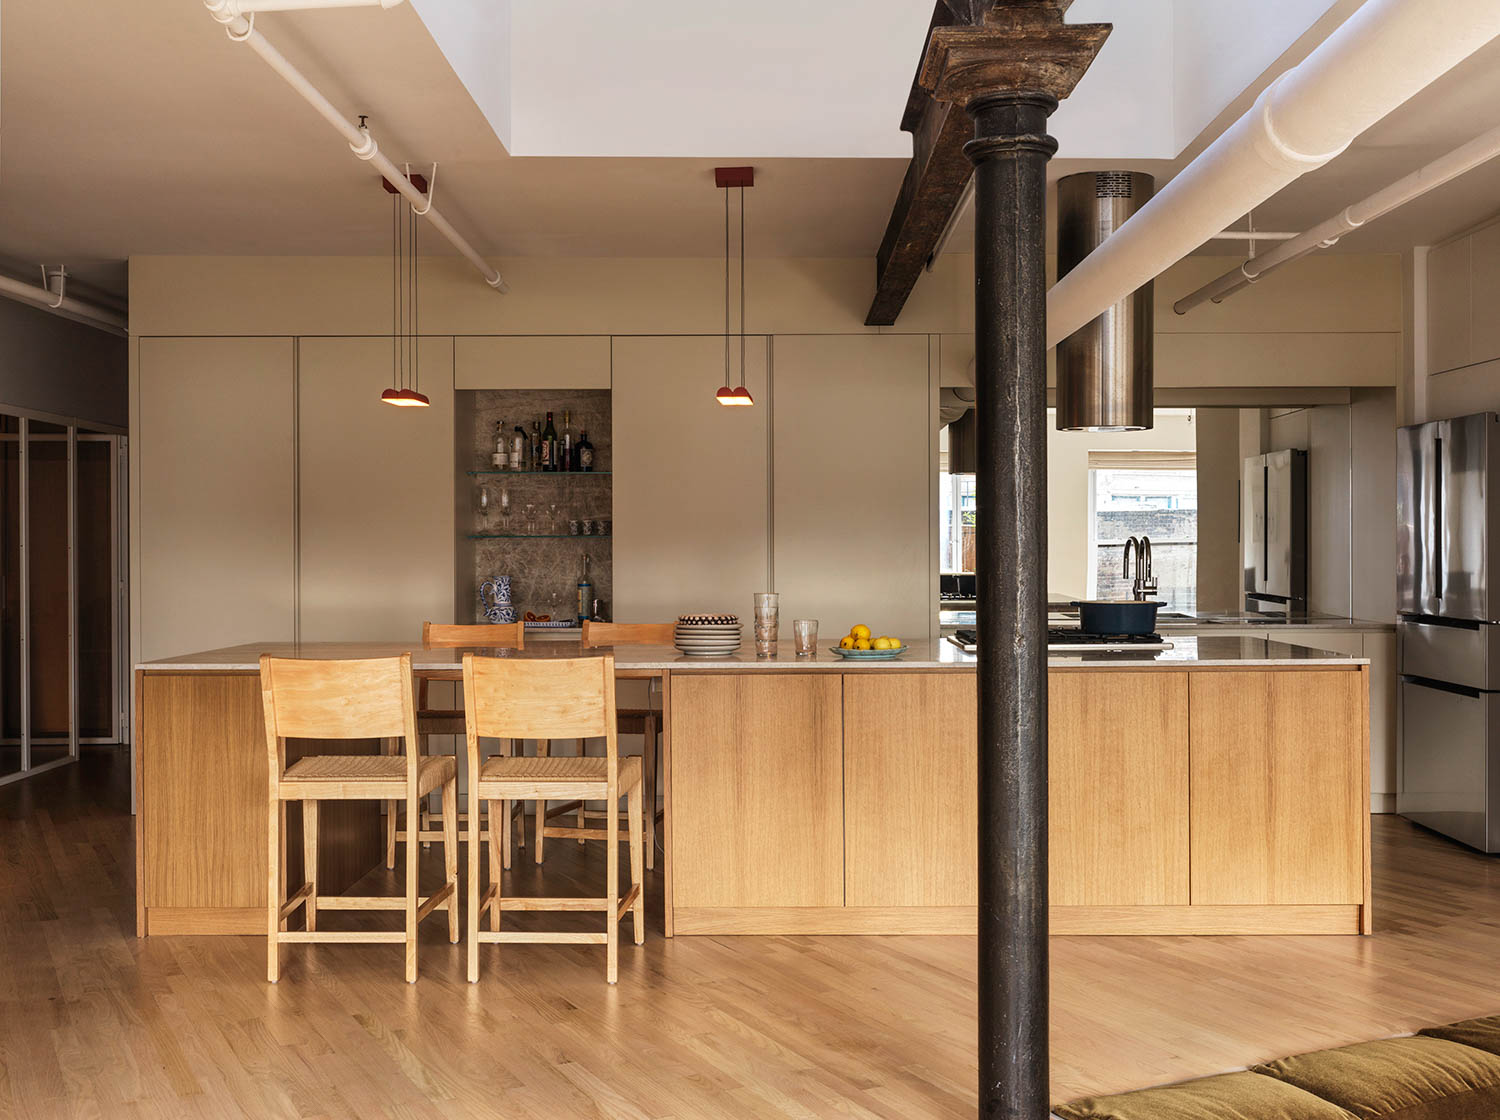 A kitchen with industrial elements in a loft apartment